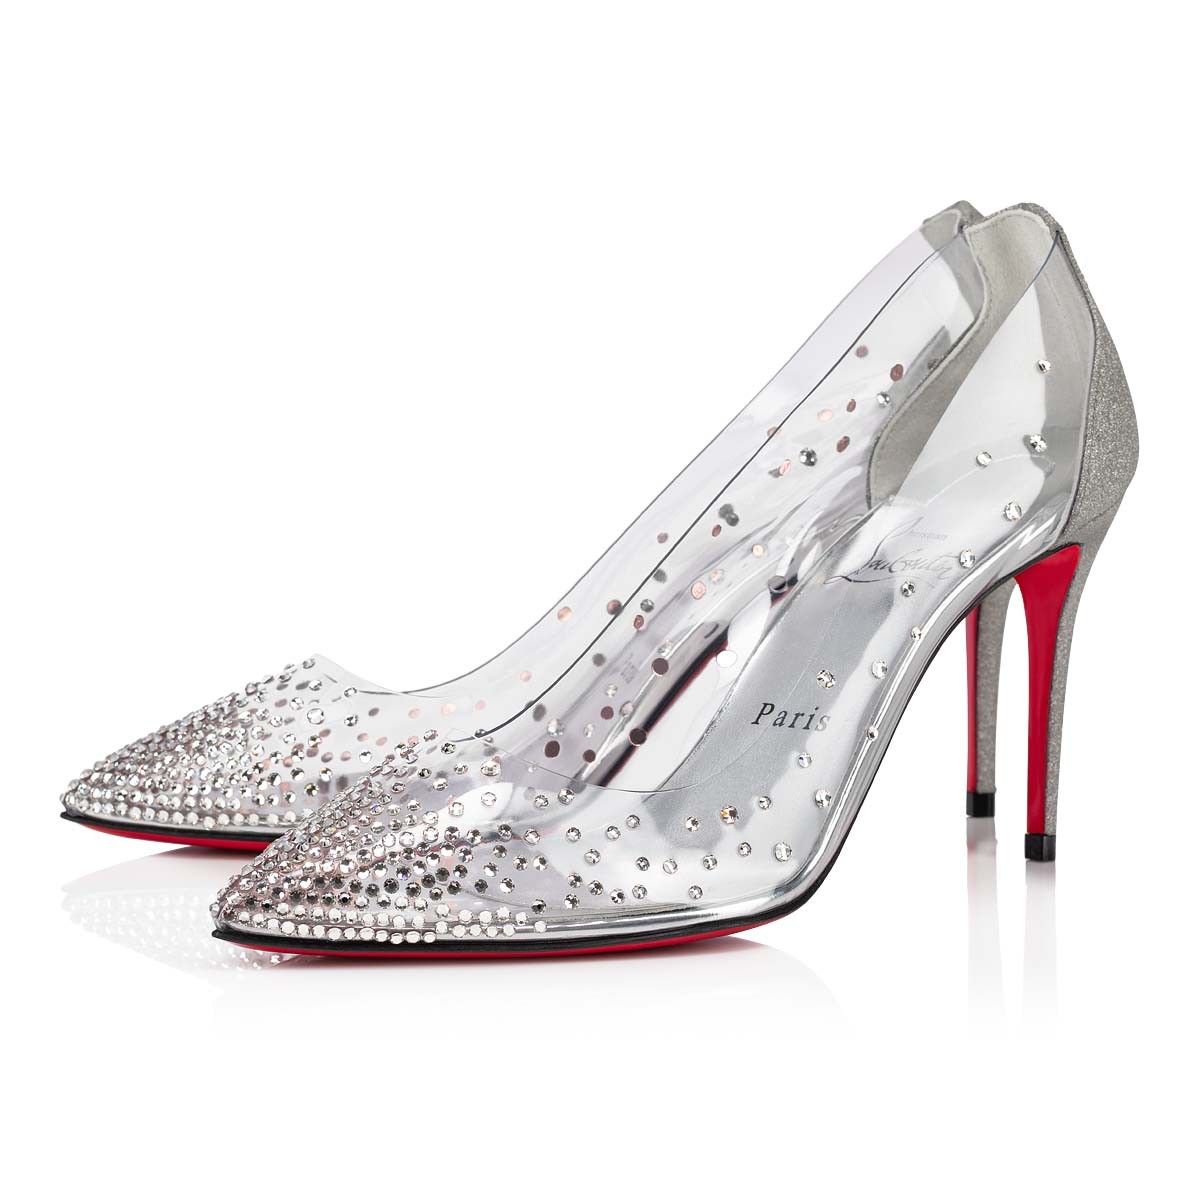 Degrastrass PVC 85 mm Glittered Calf Leather and Strass Silver Pumps